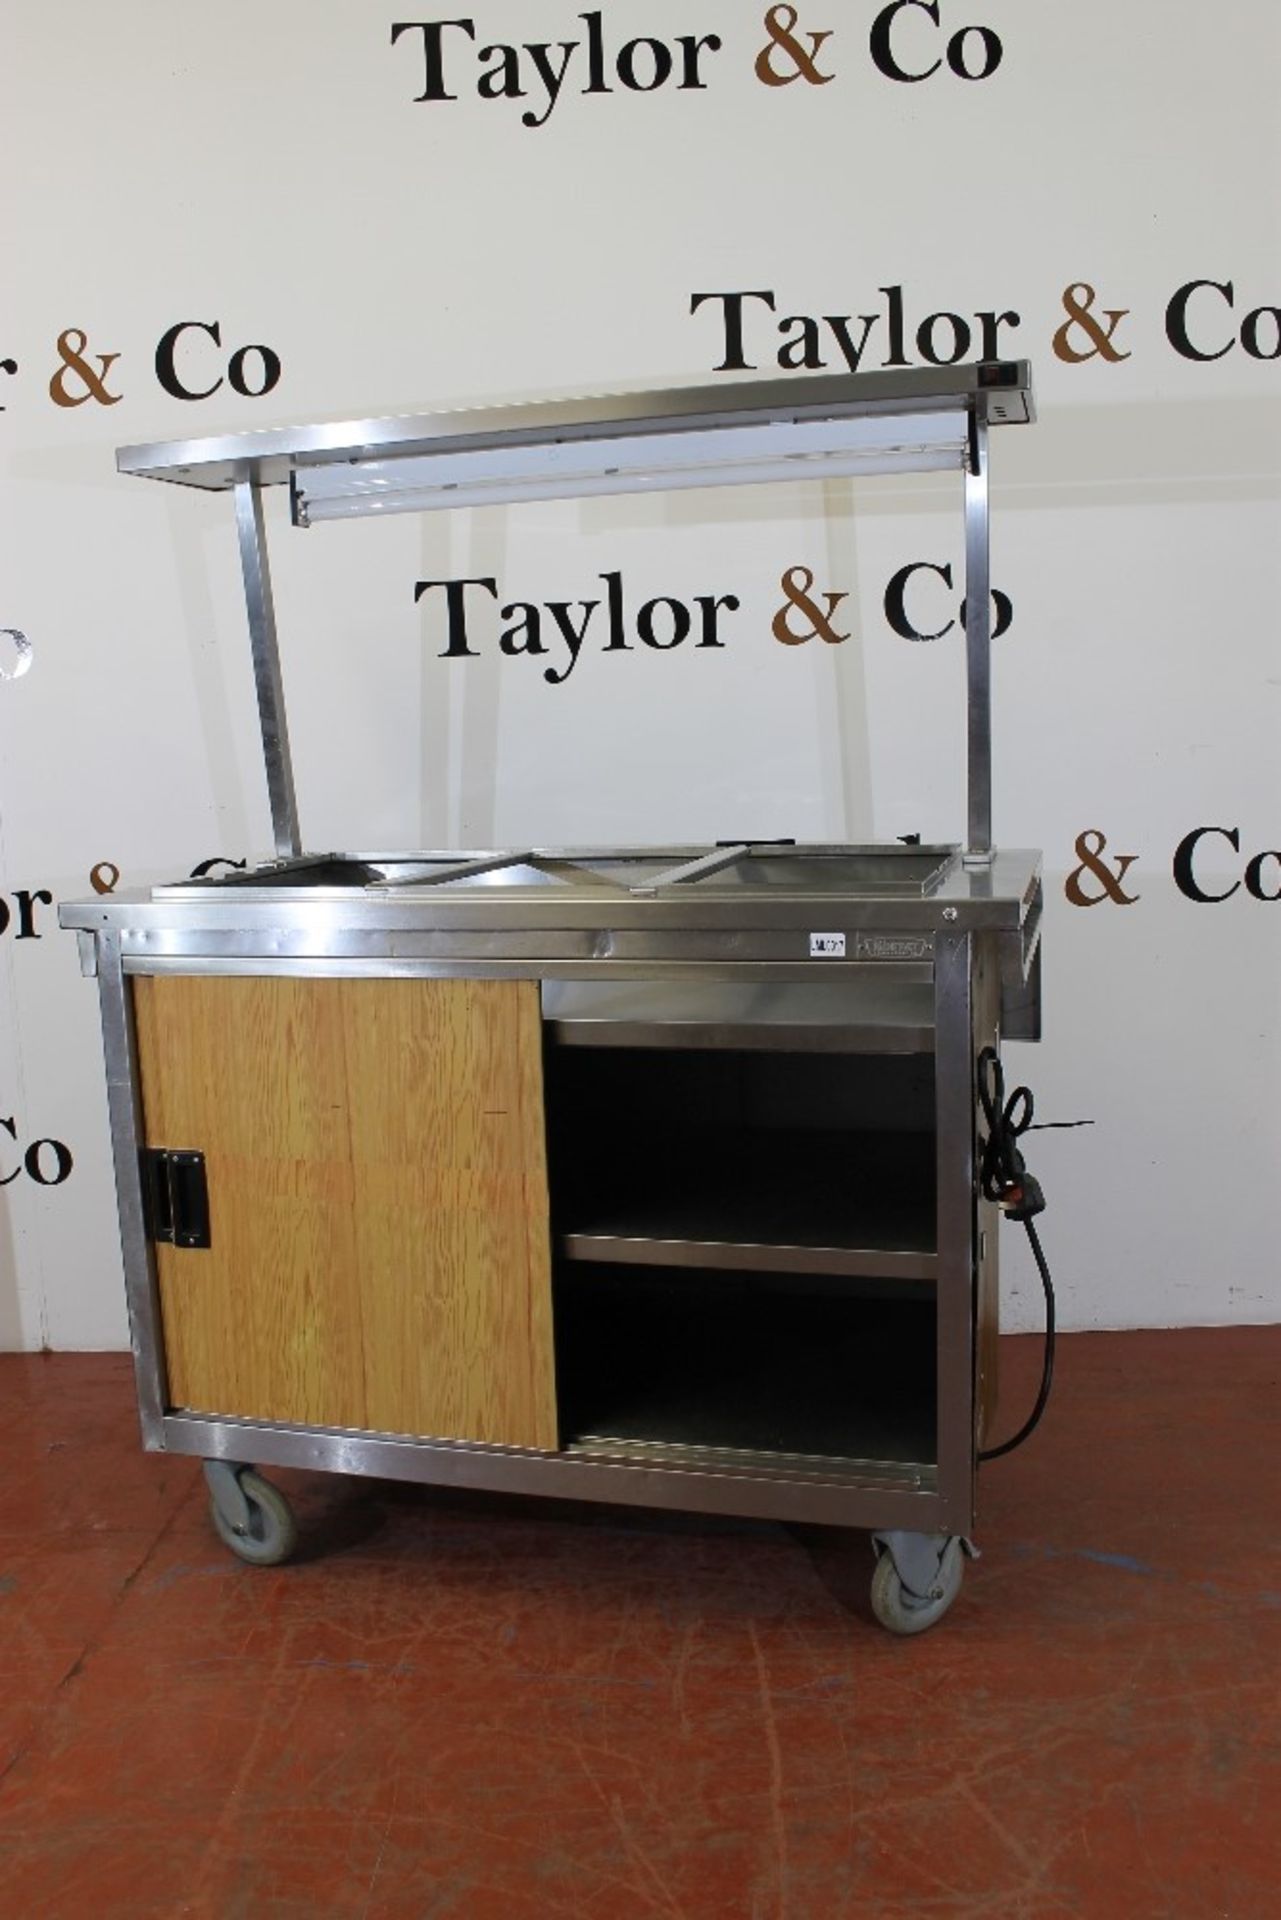 Moffatt Heated Three Tier Hot Cupboard with dry heat 3 x 1/1 Gastronorm Pans , Bain Marie – electric - Image 2 of 5